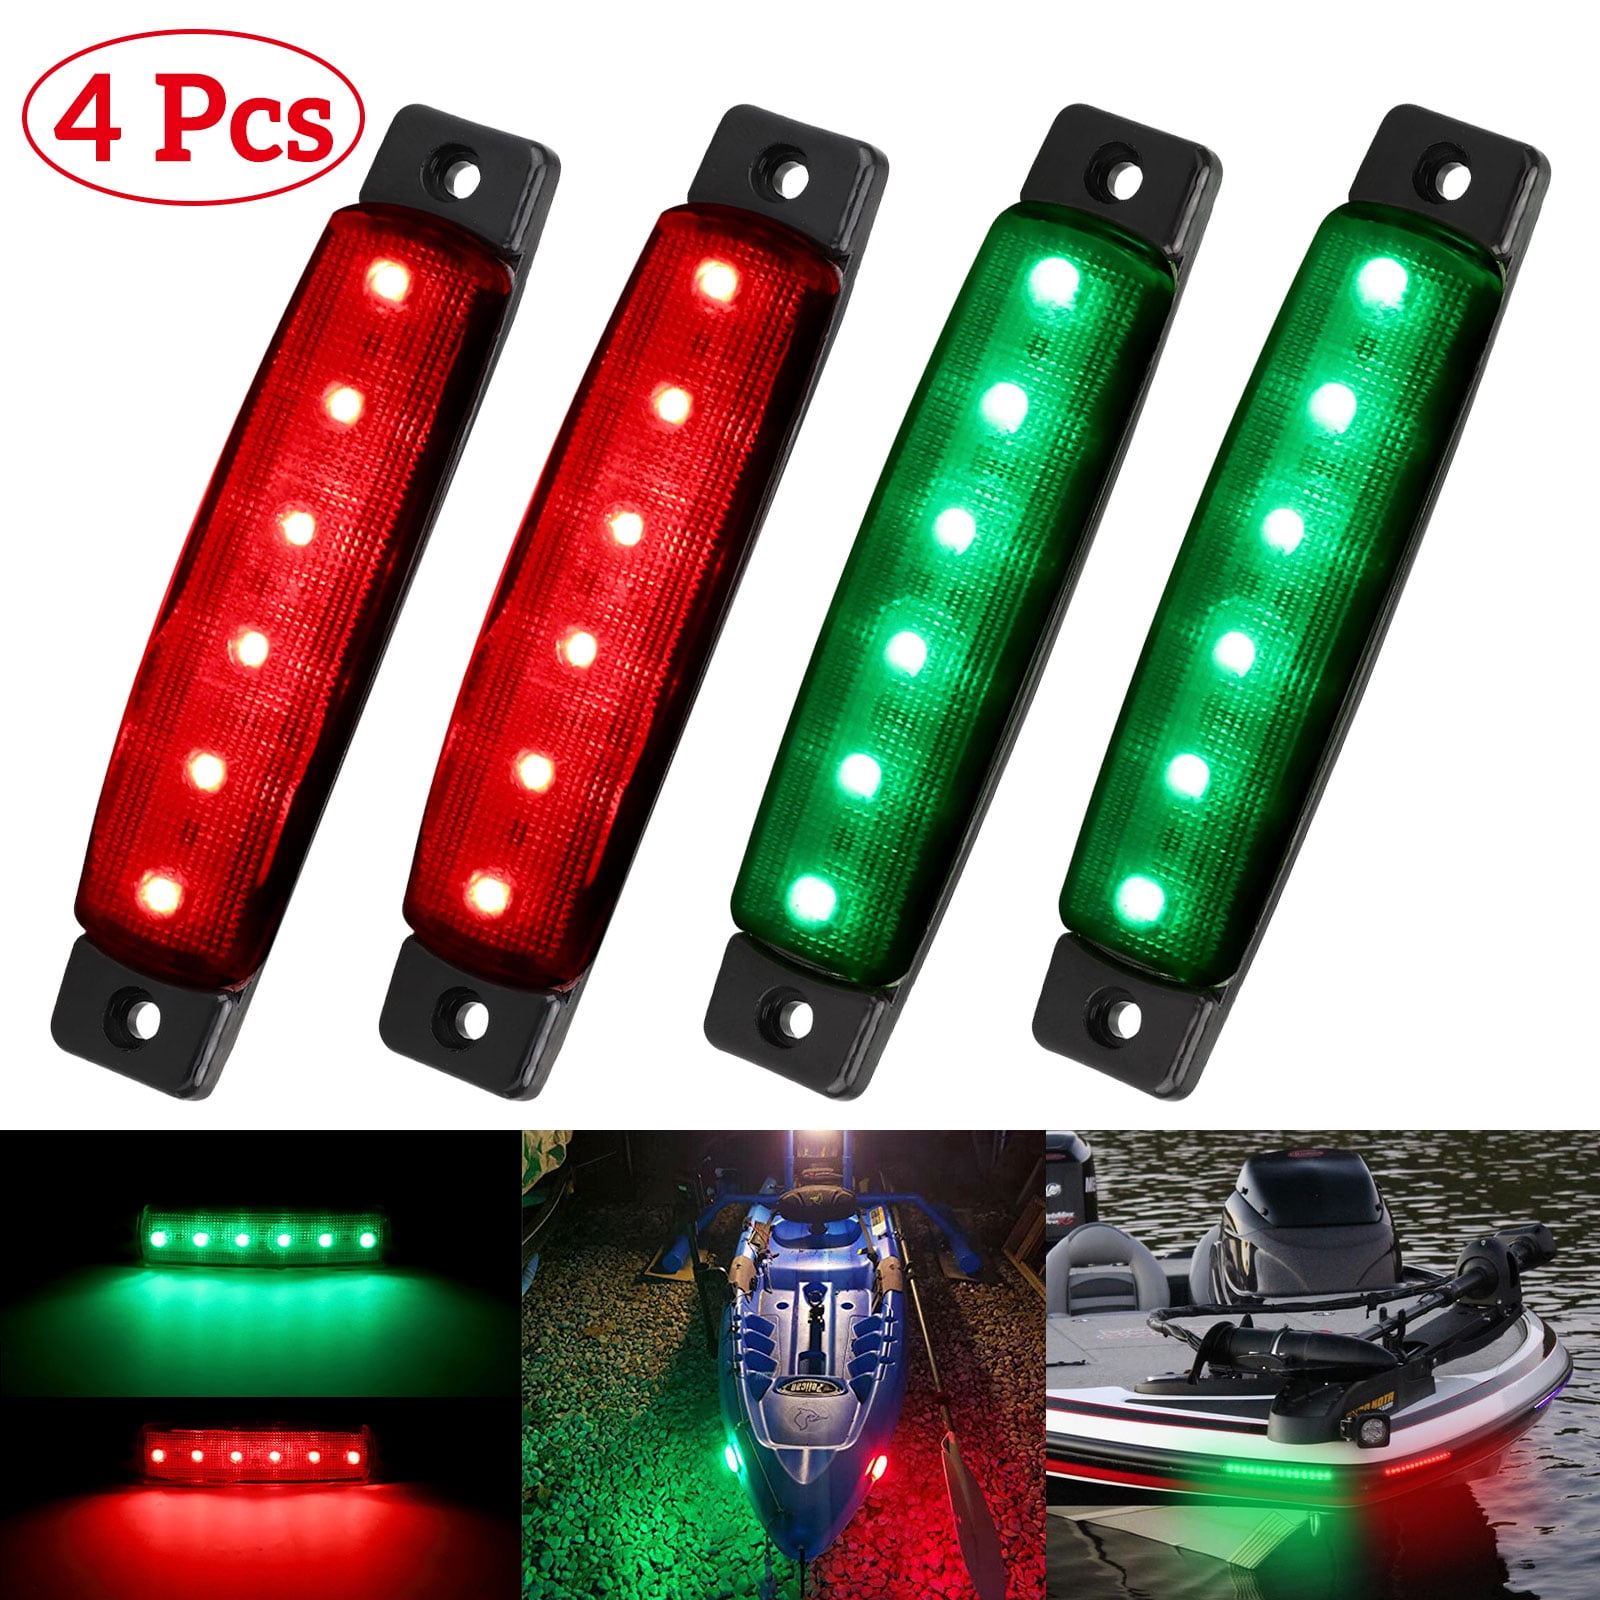 Water-Resistant Bright Eyes Green & Red Portable Marine LED Boating Lights Boat Bow or Stern Safety Lights 